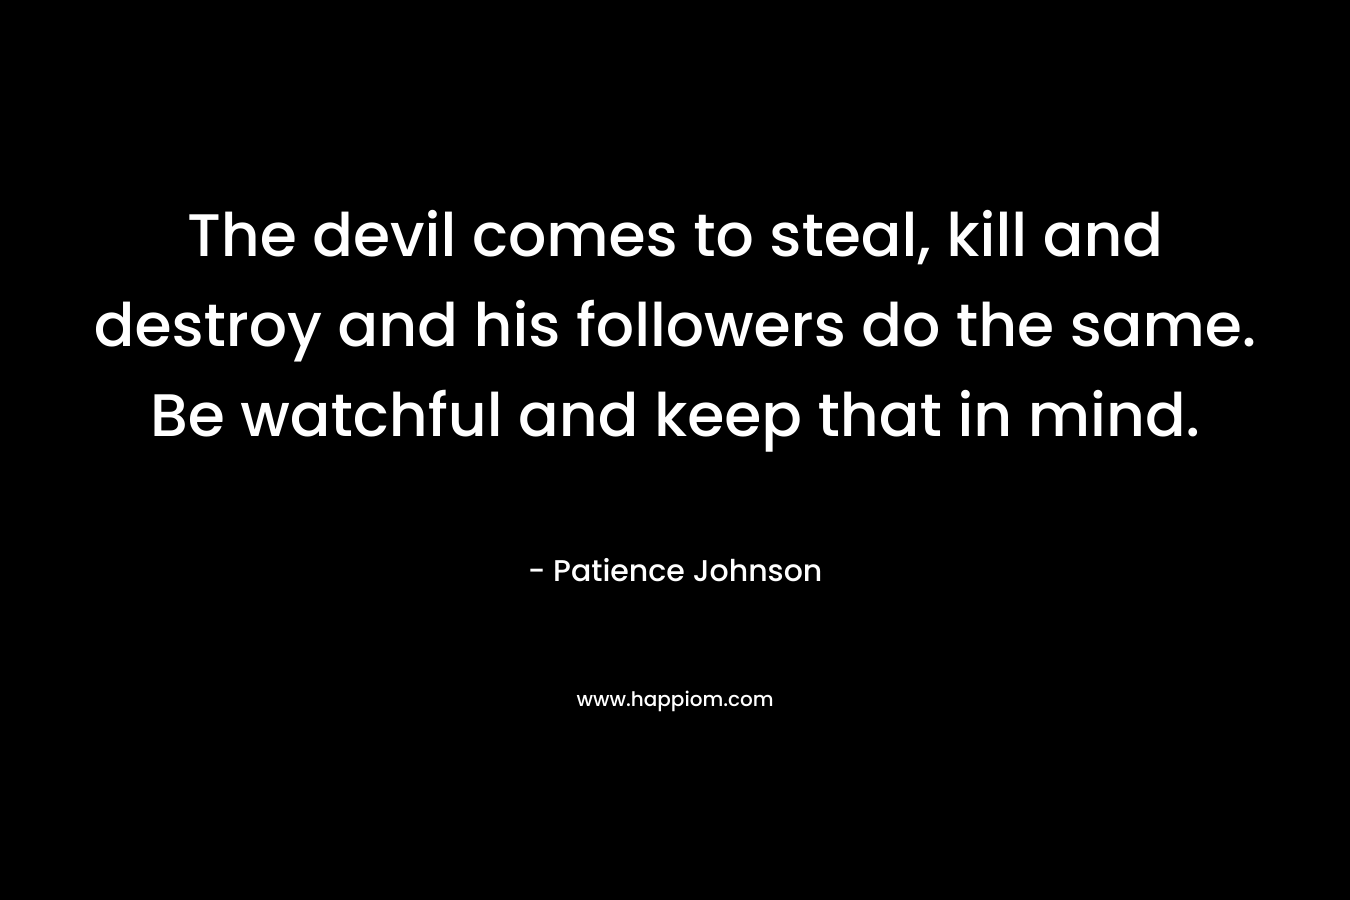 The devil comes to steal, kill and destroy and his followers do the same. Be watchful and keep that in mind. – Patience Johnson